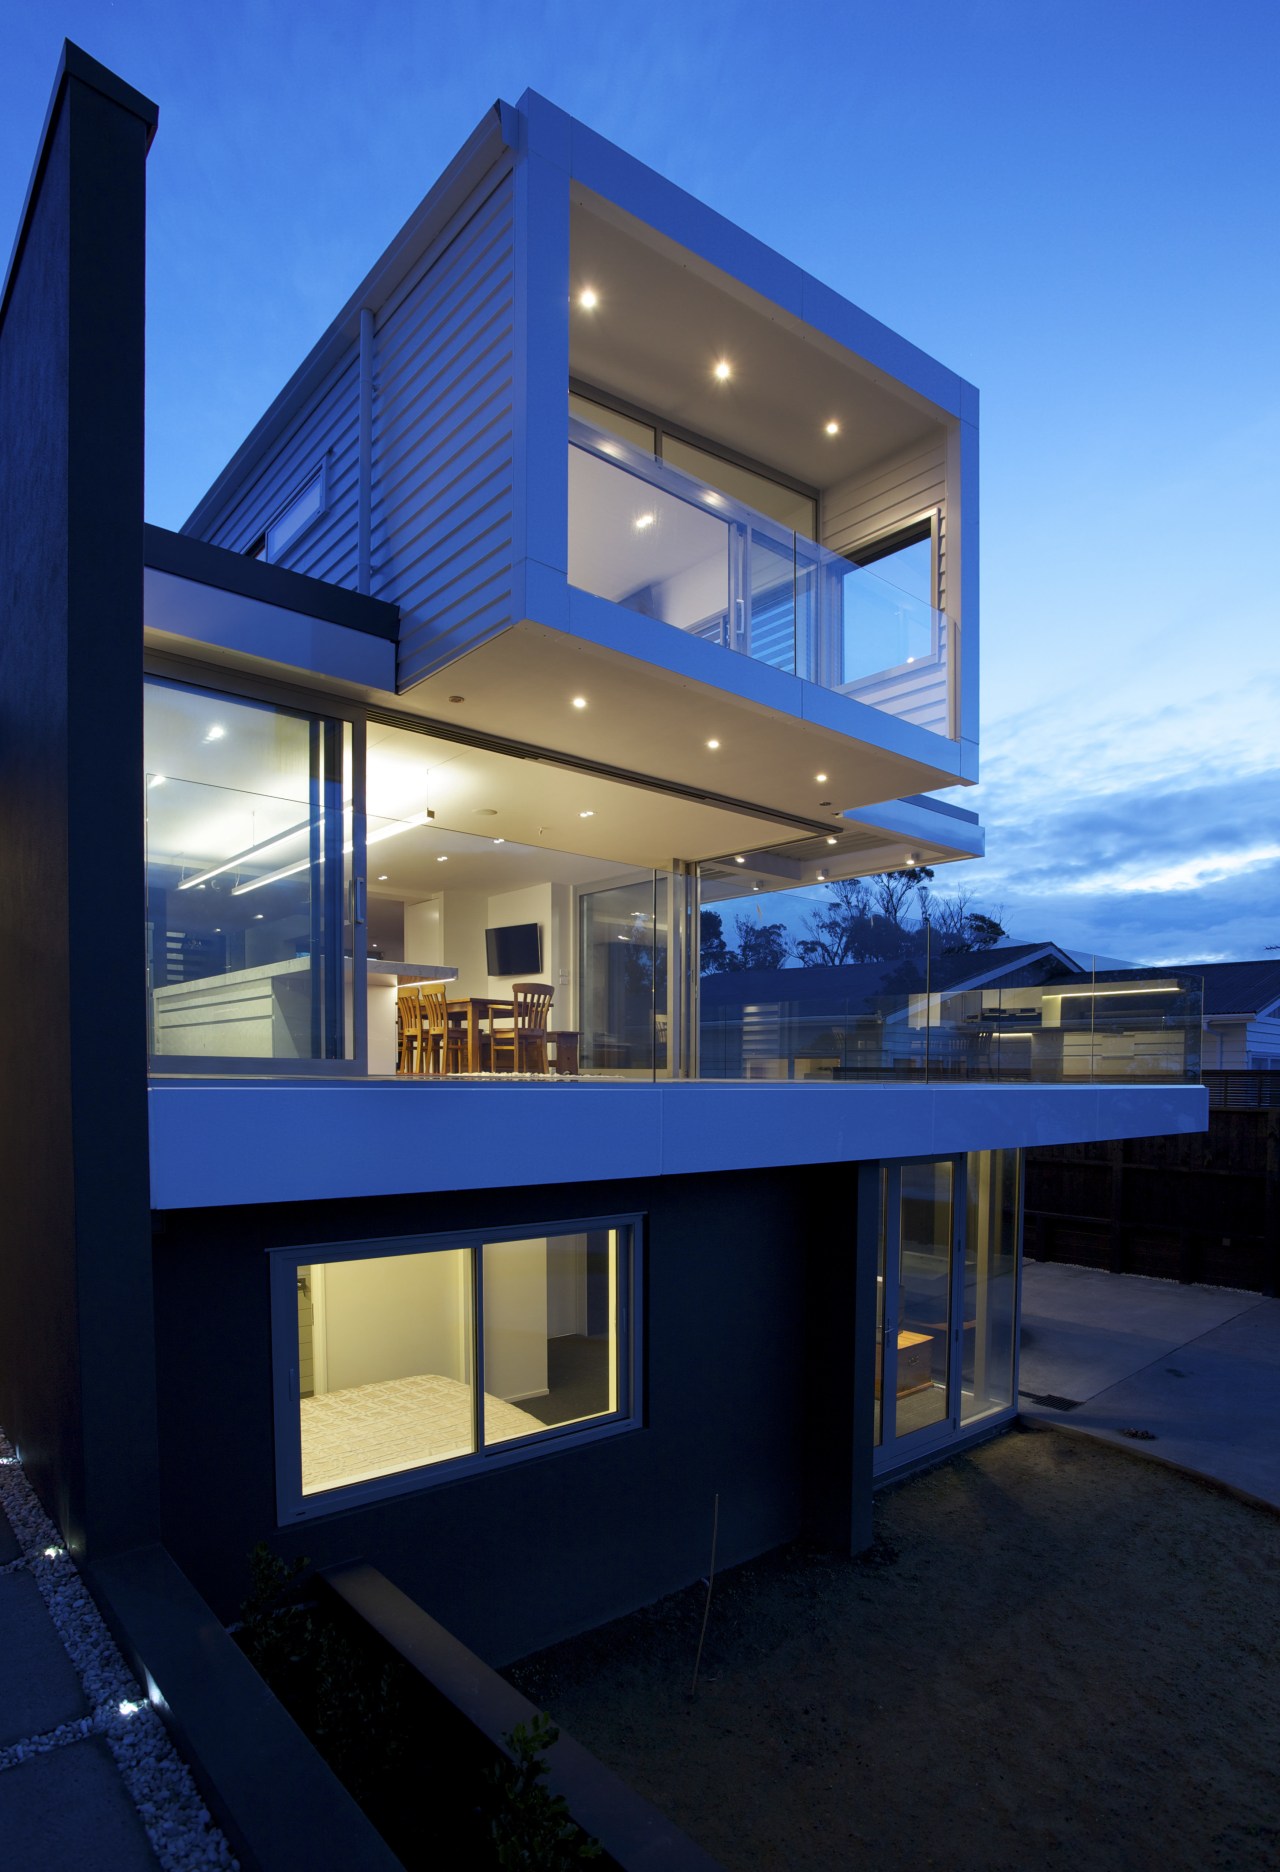 flush modern joinery from ASL. The joinery includes architecture, building, elevation, facade, home, house, real estate, blue